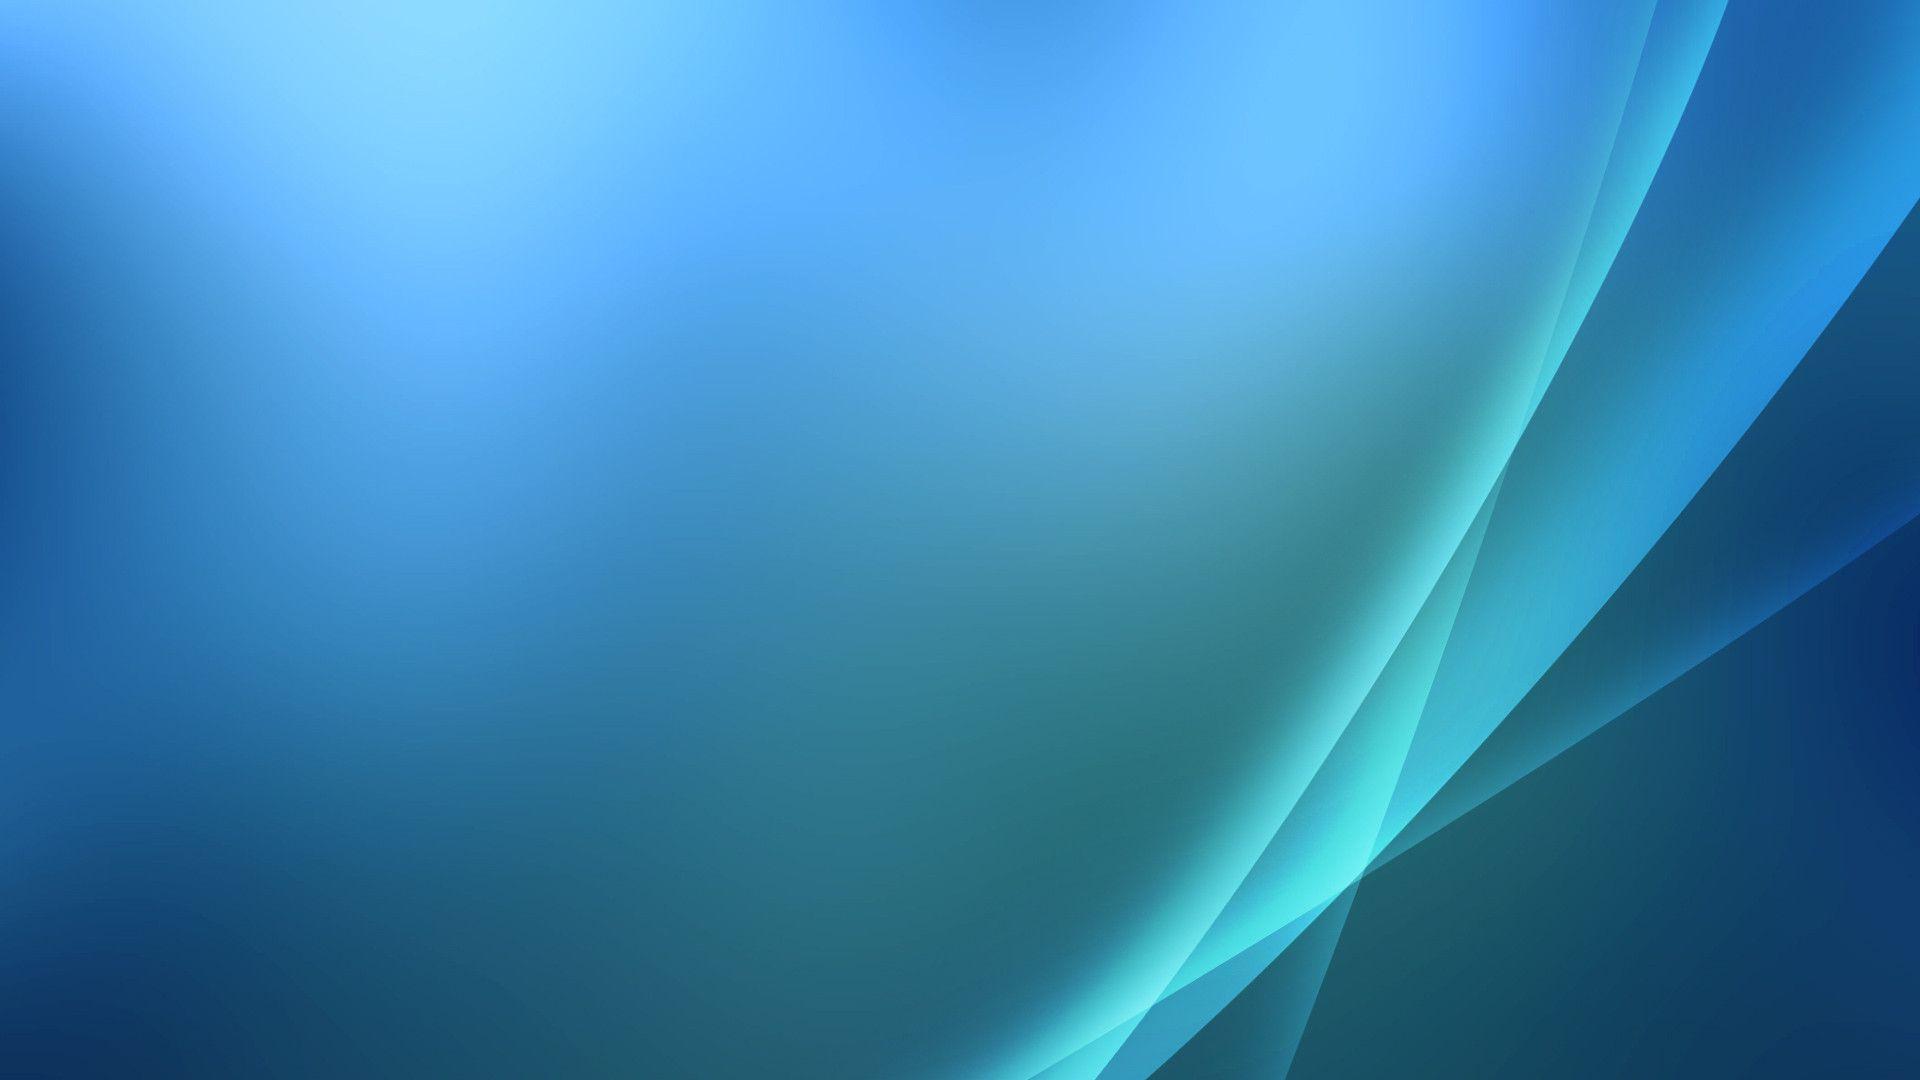 HD Background Images - Wallpaper Cave